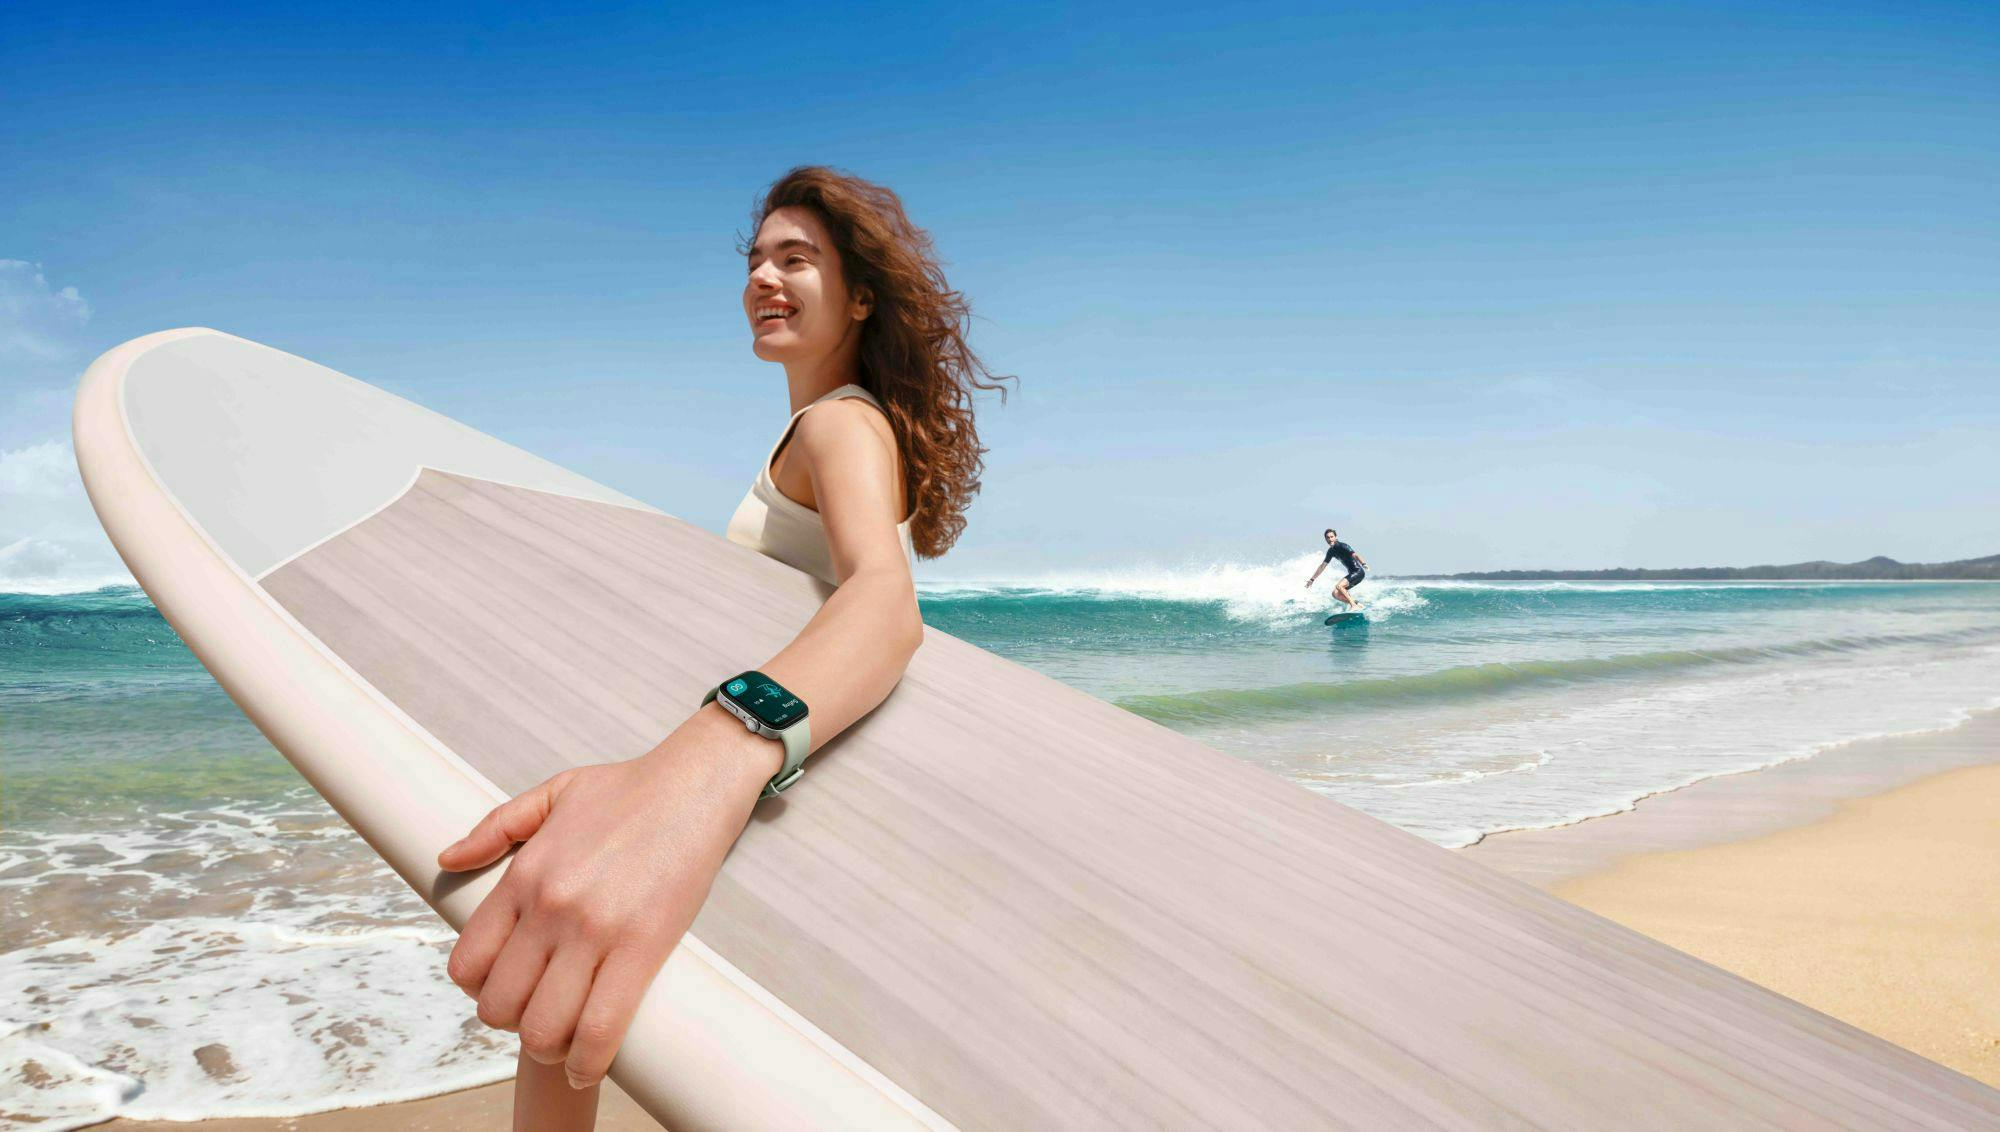 nature outdoors sea water sea waves surfing person adult female woman